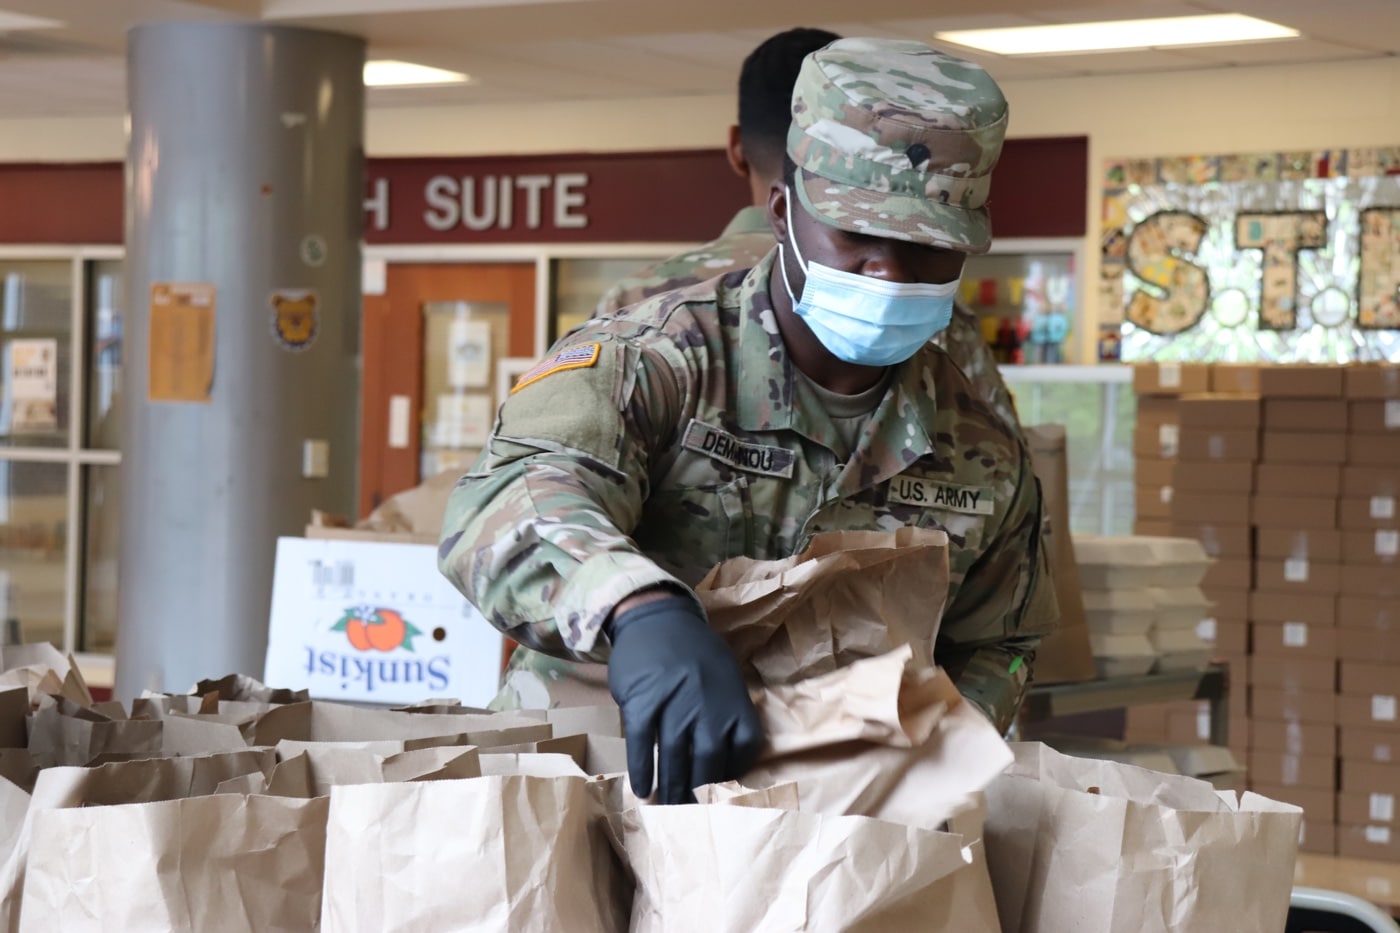 MD National Guardsman prepares food for delivery during COVID-19 pandemic